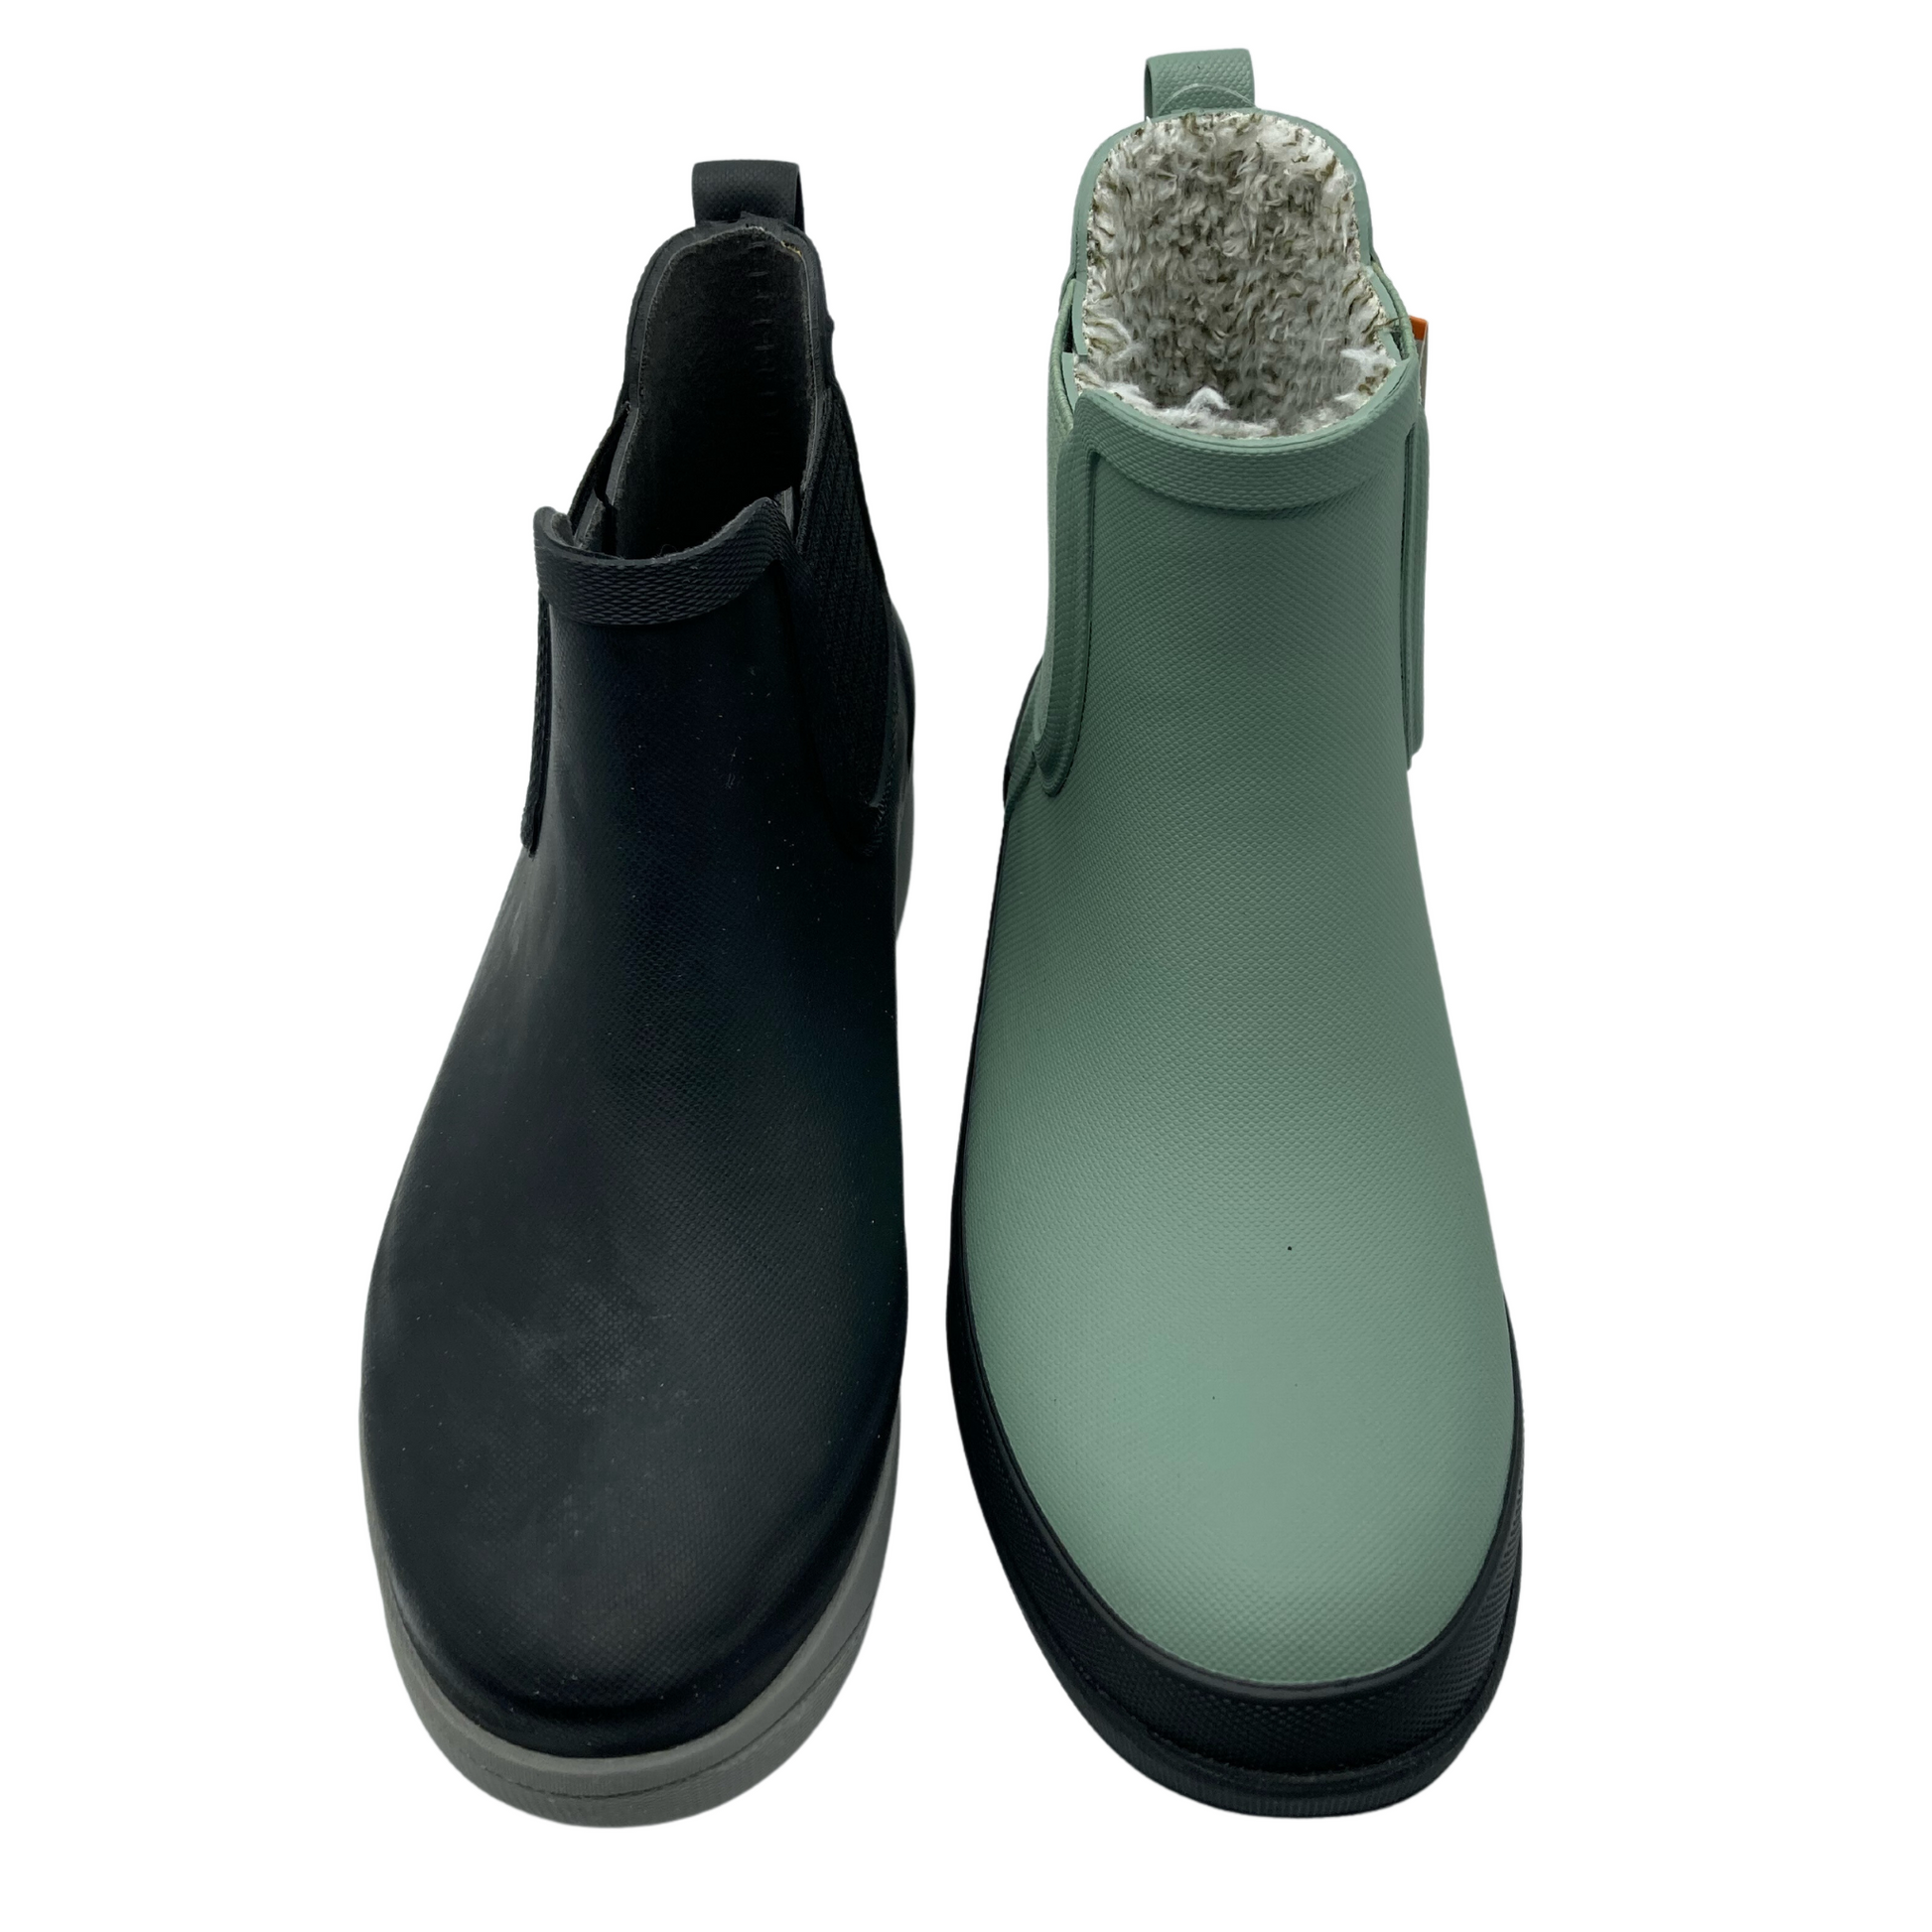 A view of a pair of short rain boots. Left one is black and right one is jade. Both have rounded toes and rubber outsoles